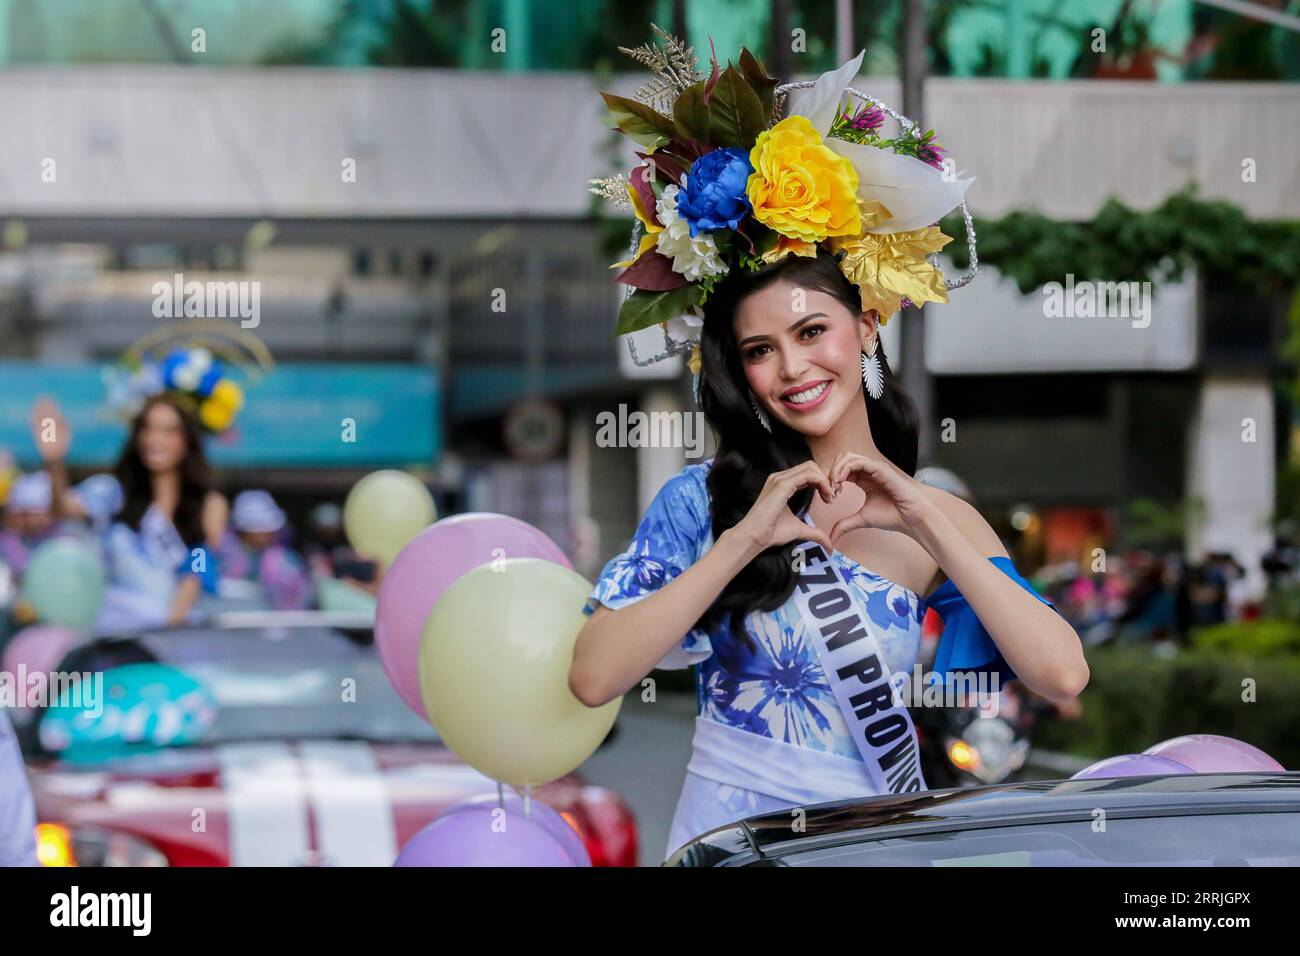 220723 -- QUEZON CITY, July 23, 2022 -- A contestant for the Binibining Pilipinas Miss Philippines 2022 attends the Grand Parade of Beauties in Quezon City, the Philippines on July 23, 2022. A total of 40 contestants will vie for the Binibining Pilipinas 2022 beauty pageant this year.  PHILIPPINES-QUEZON CITY-BEAUTY CONTEST-PARADE RouellexUmali PUBLICATIONxNOTxINxCHN Stock Photo